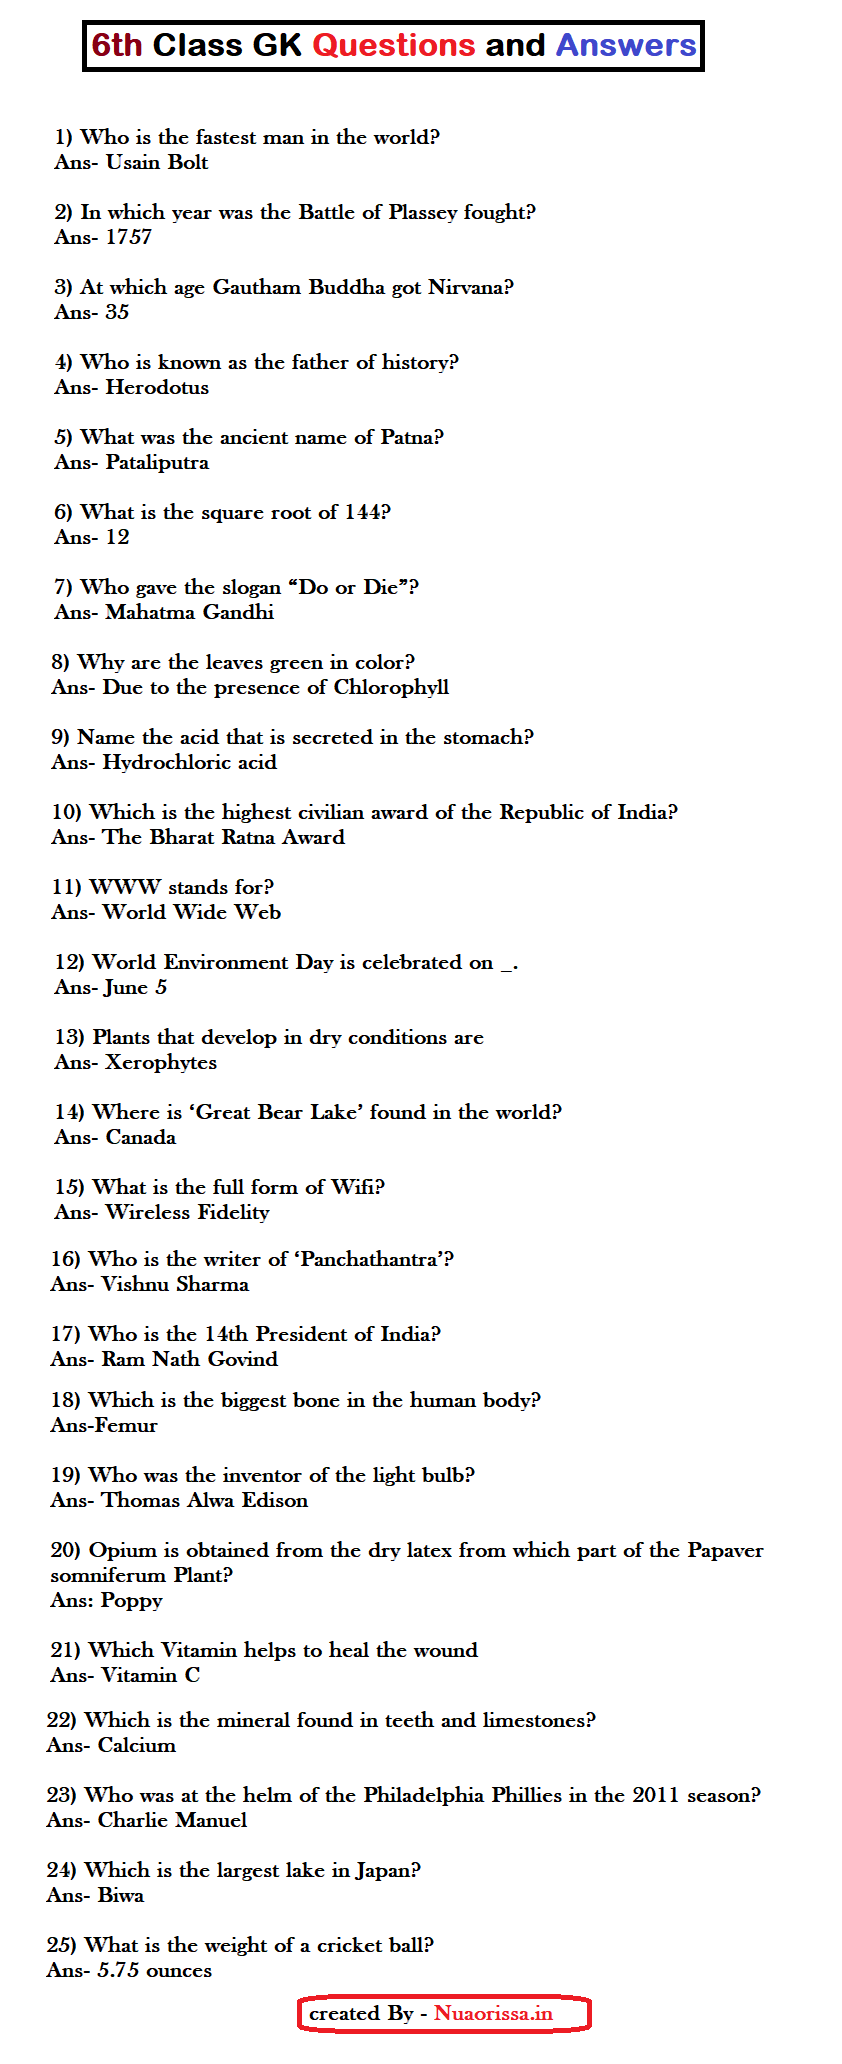 6th grade general knowledge questions and answers in English, GK Questions for Class 6 with Answers